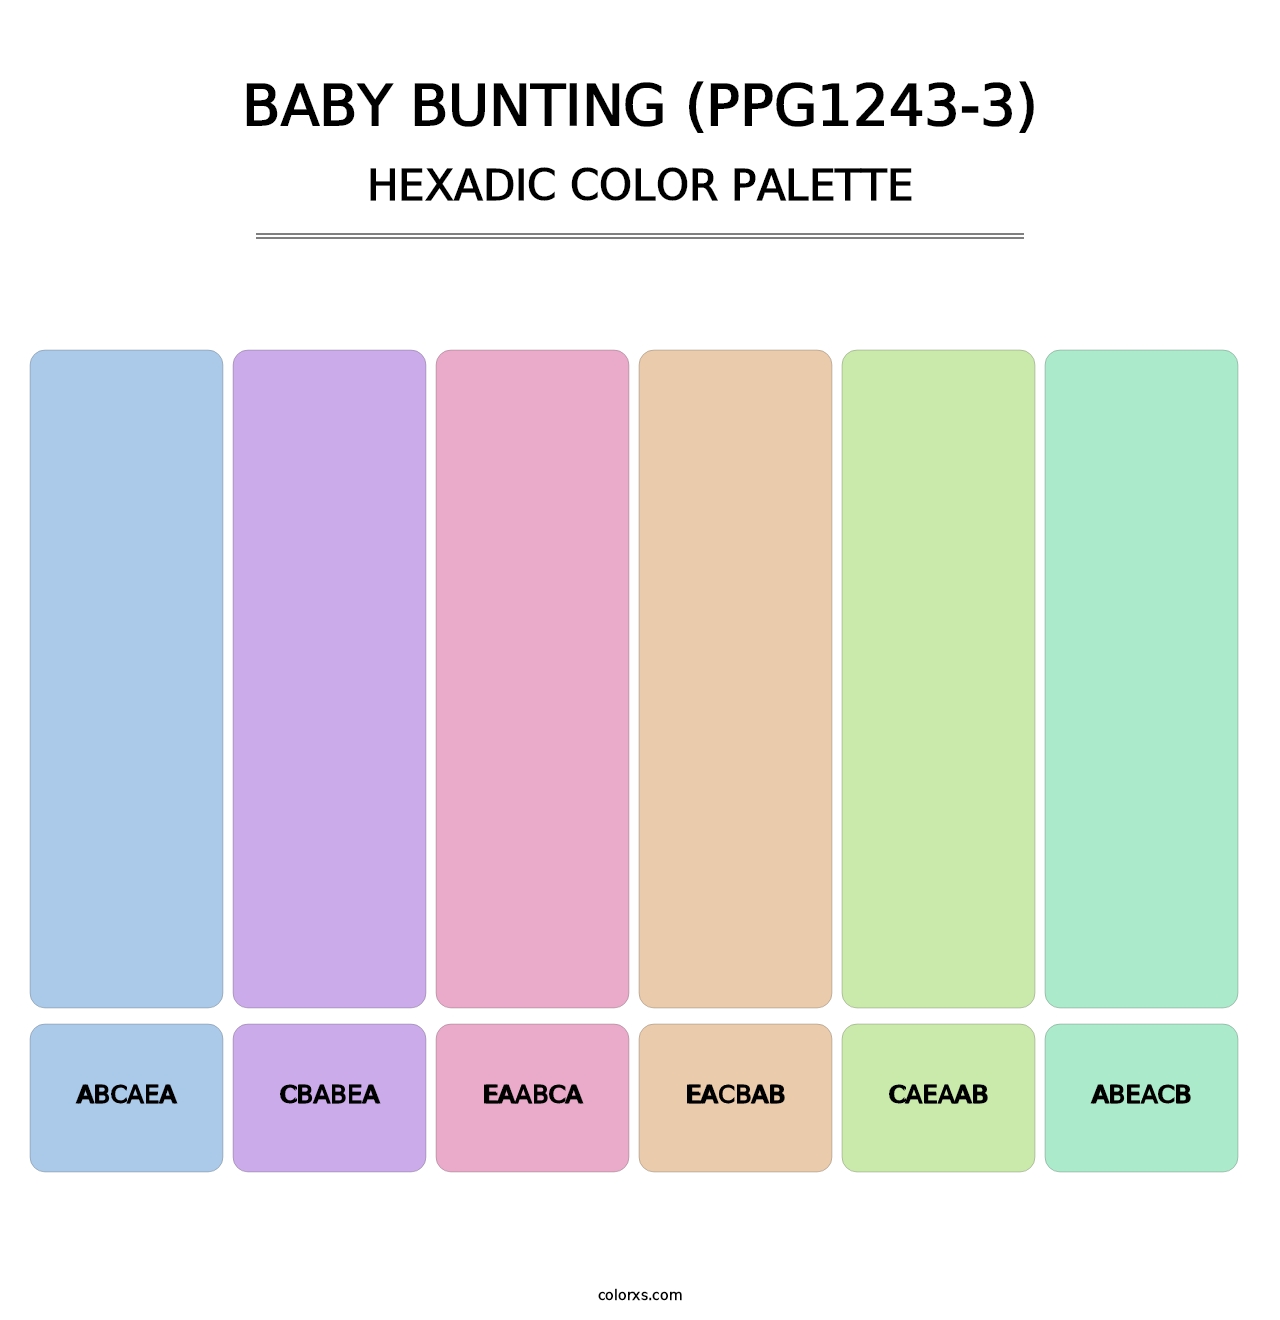 Baby Bunting (PPG1243-3) - Hexadic Color Palette